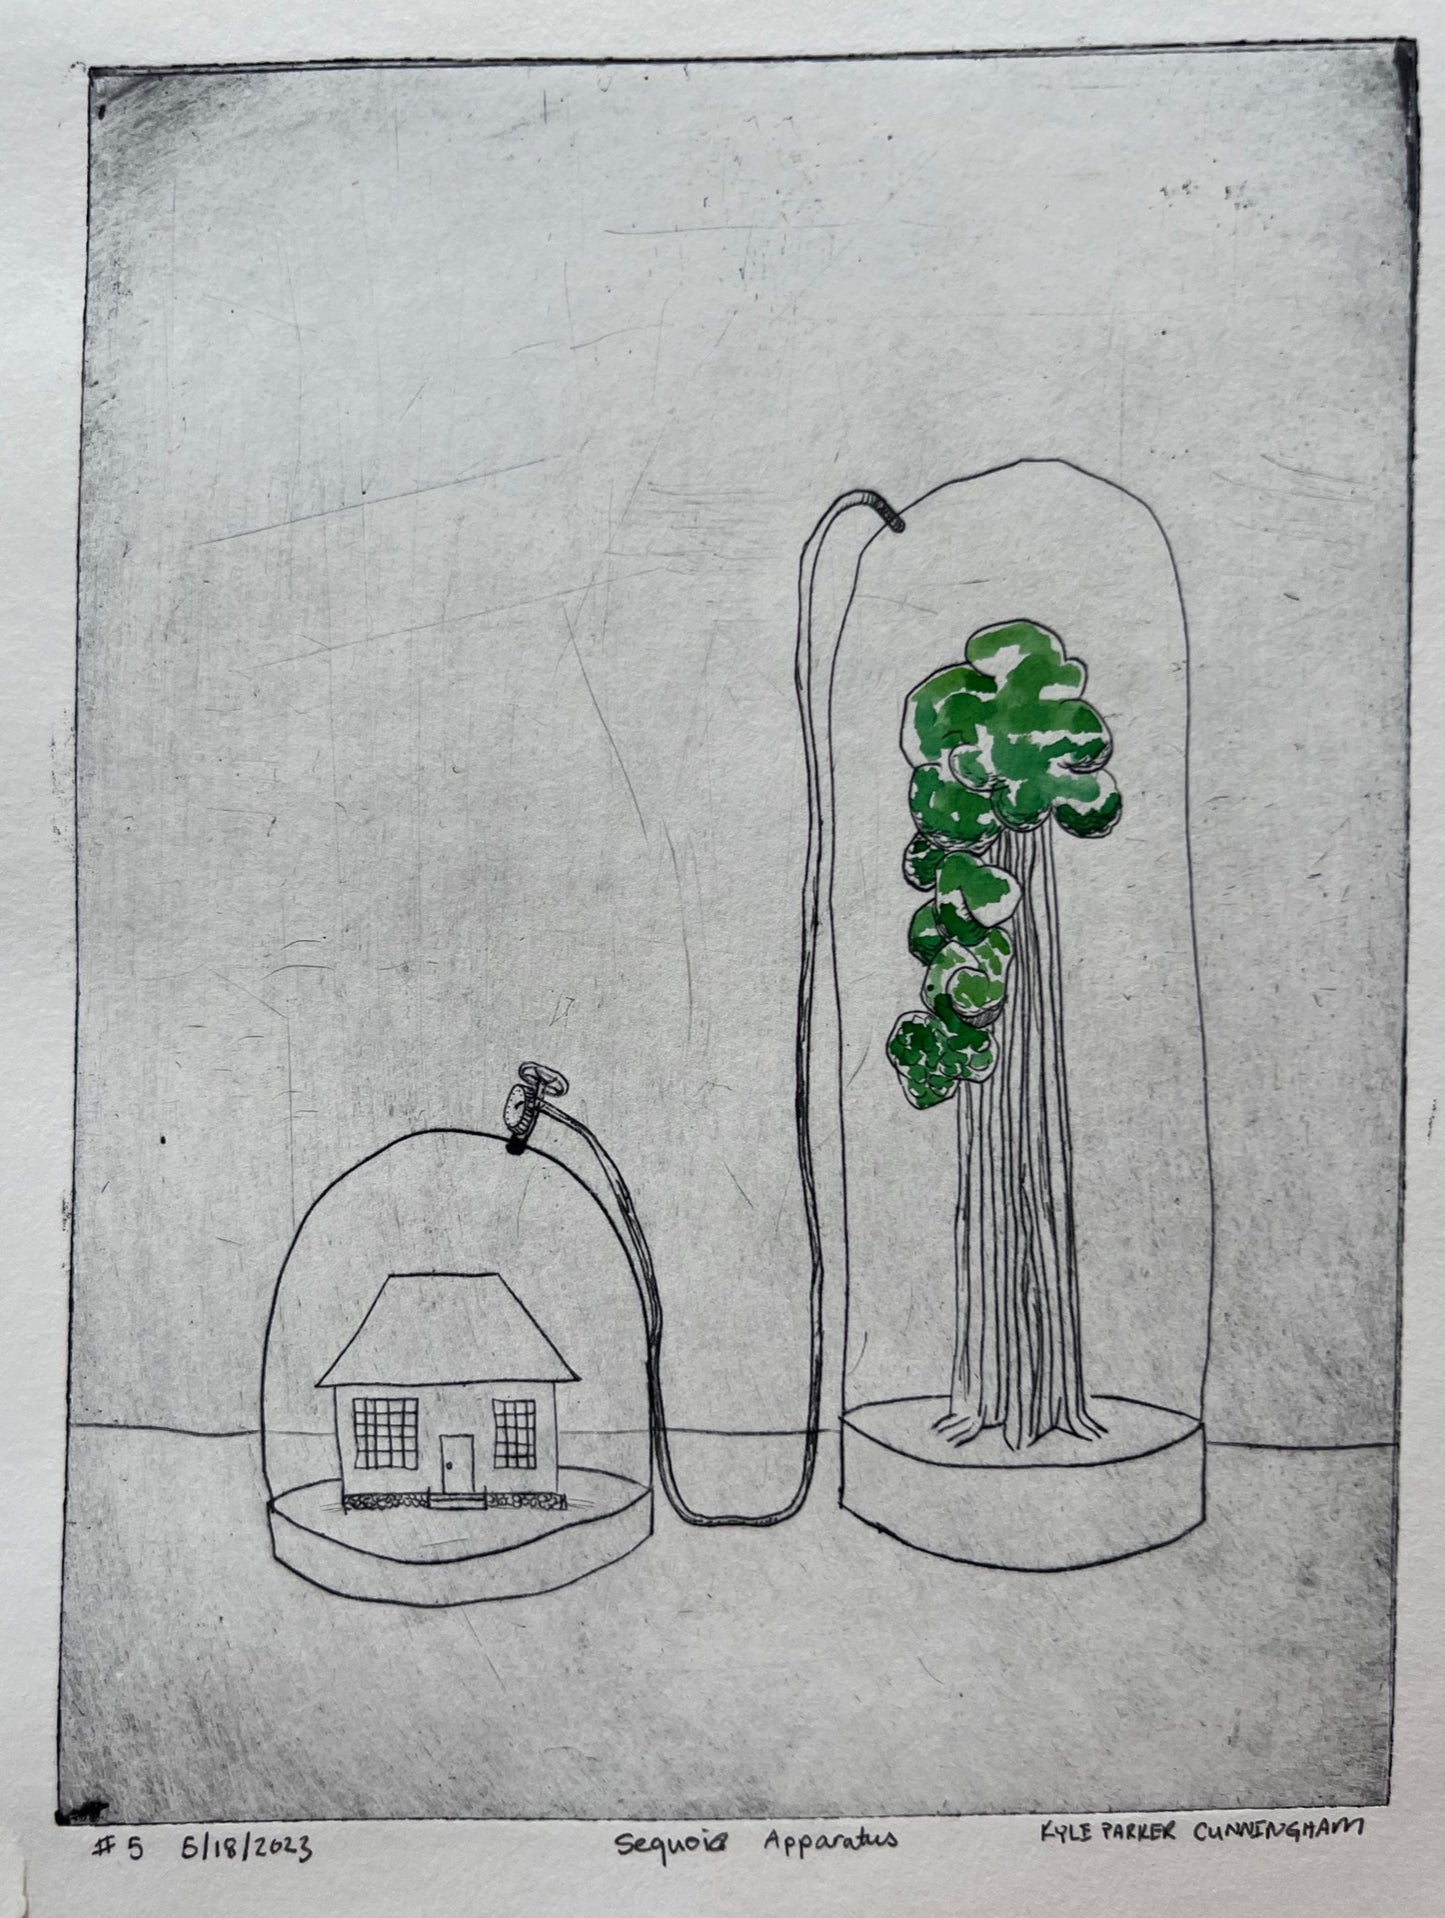 Sequoia Apparatus No. 5- Drypoint Print by Kyle Parker Cunningham